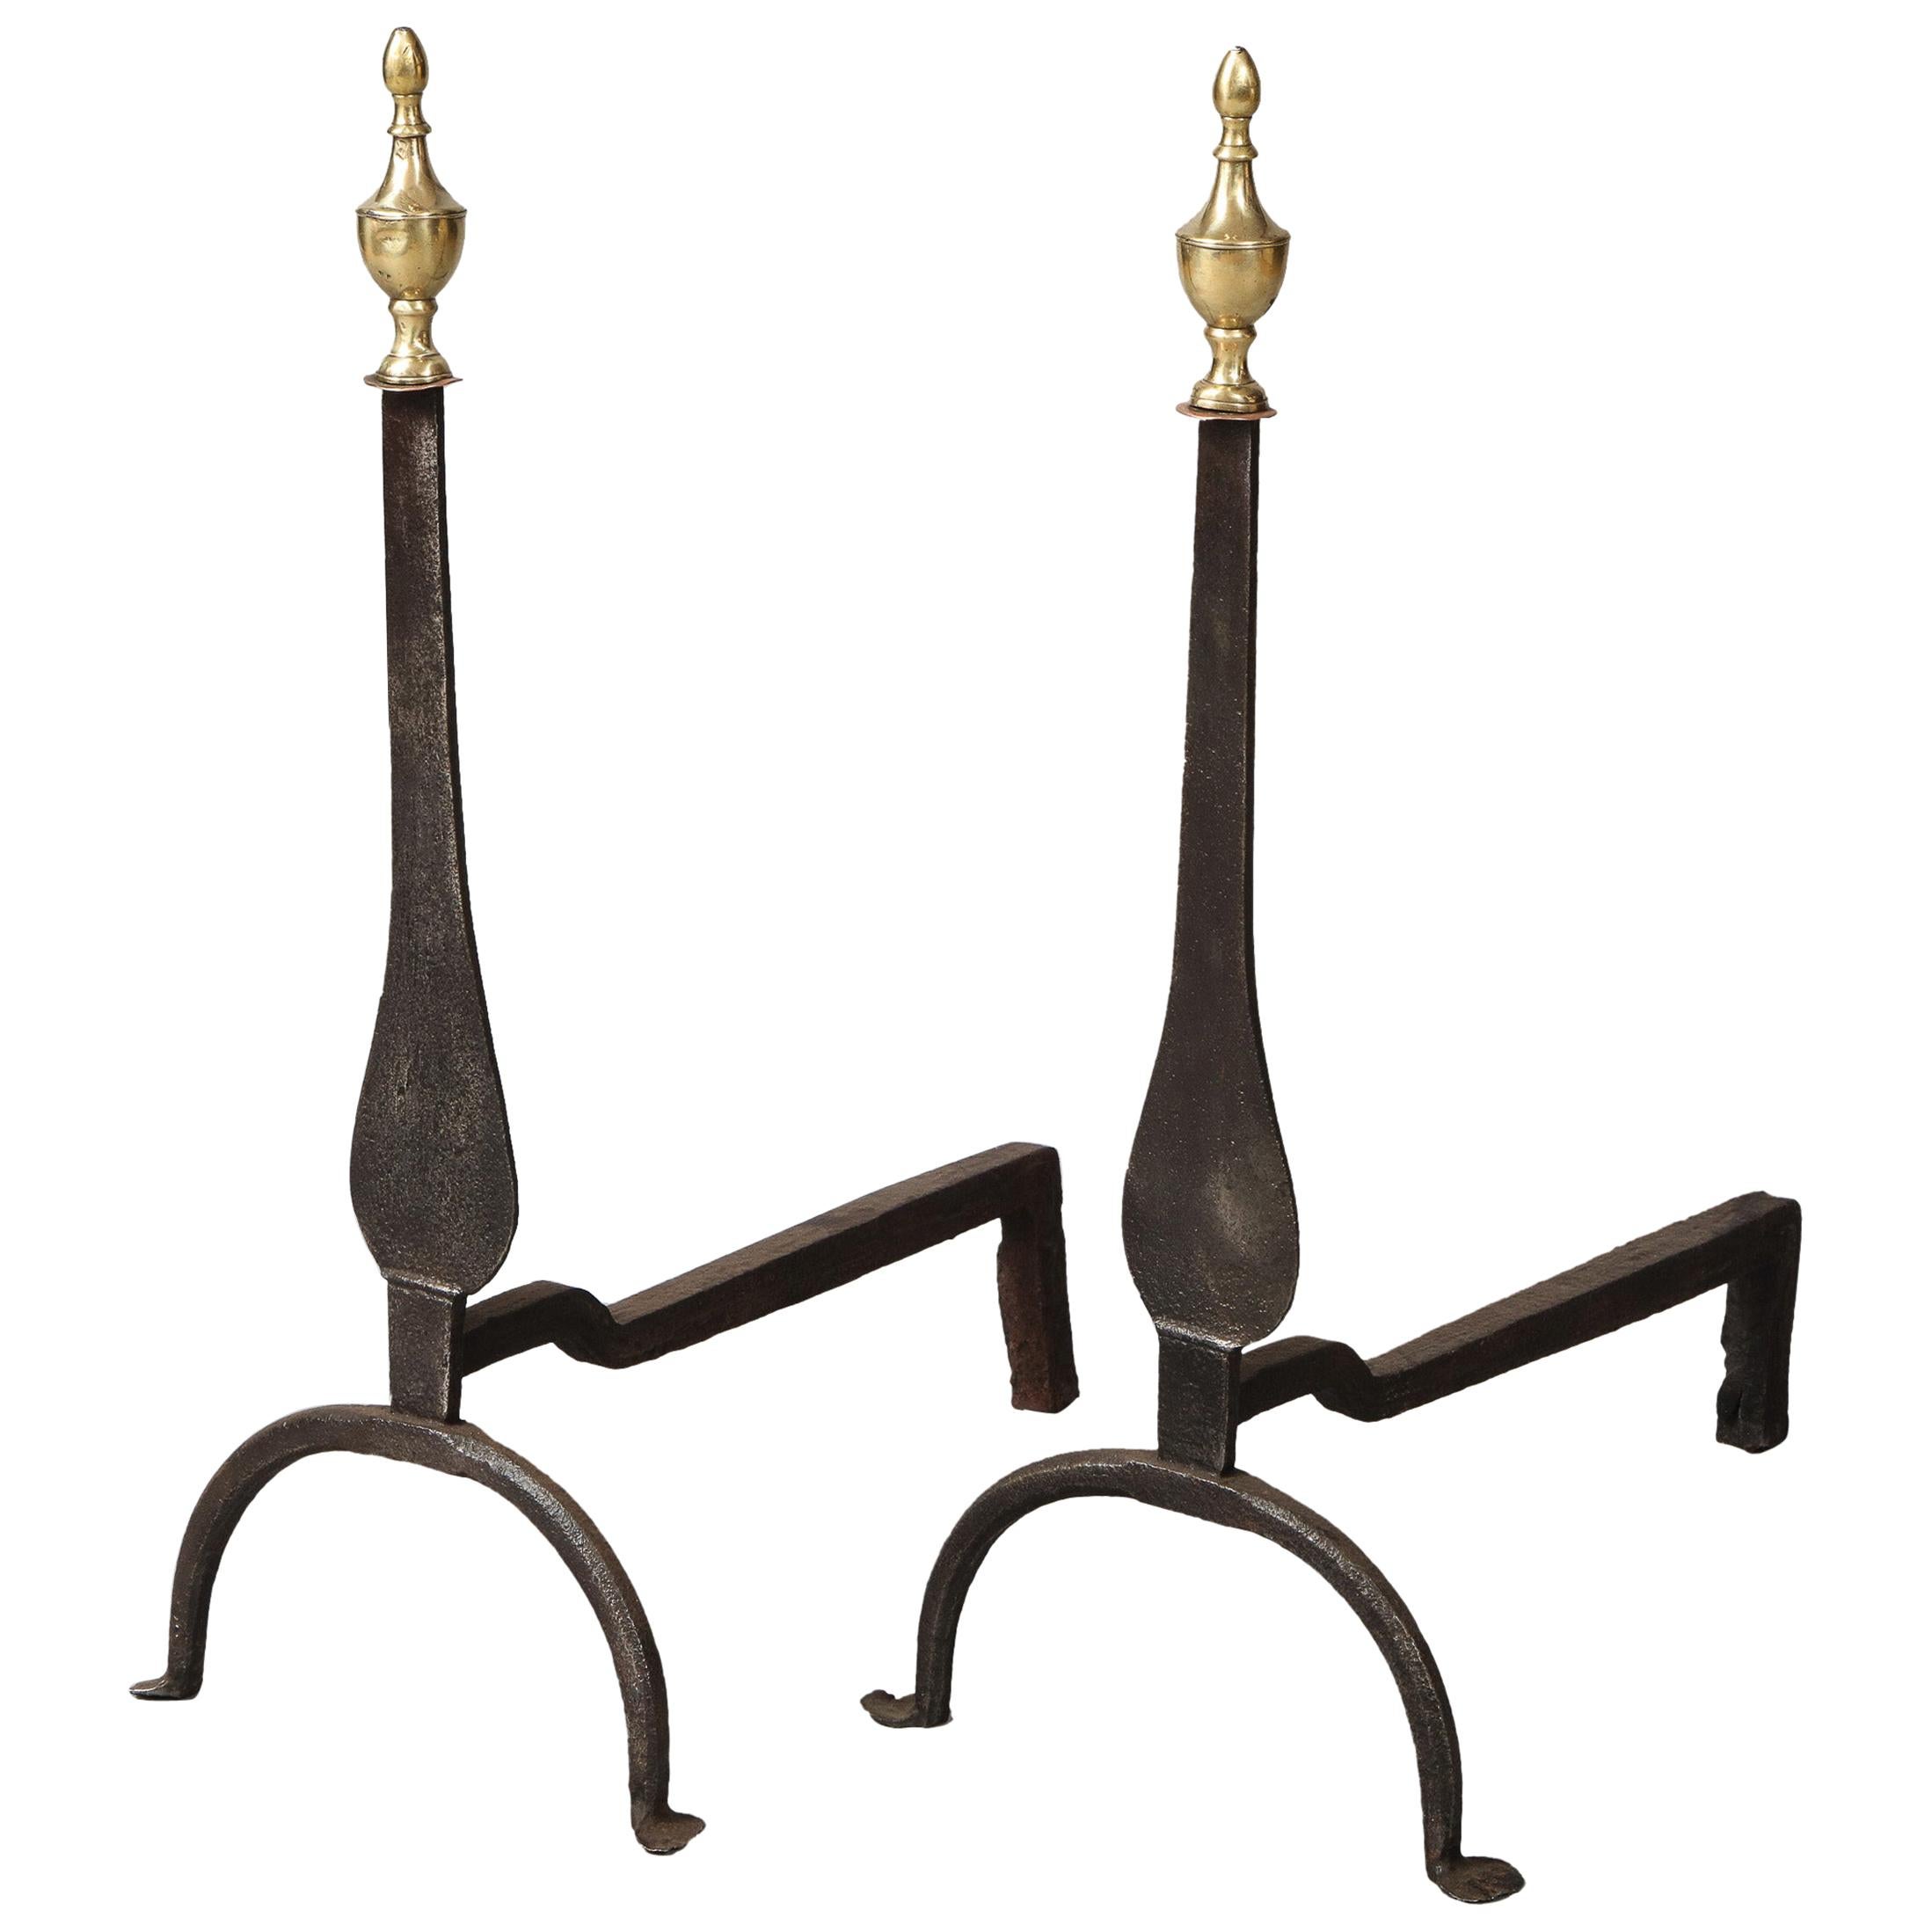 Pair of Neoclassical Brass and Iron Andirons